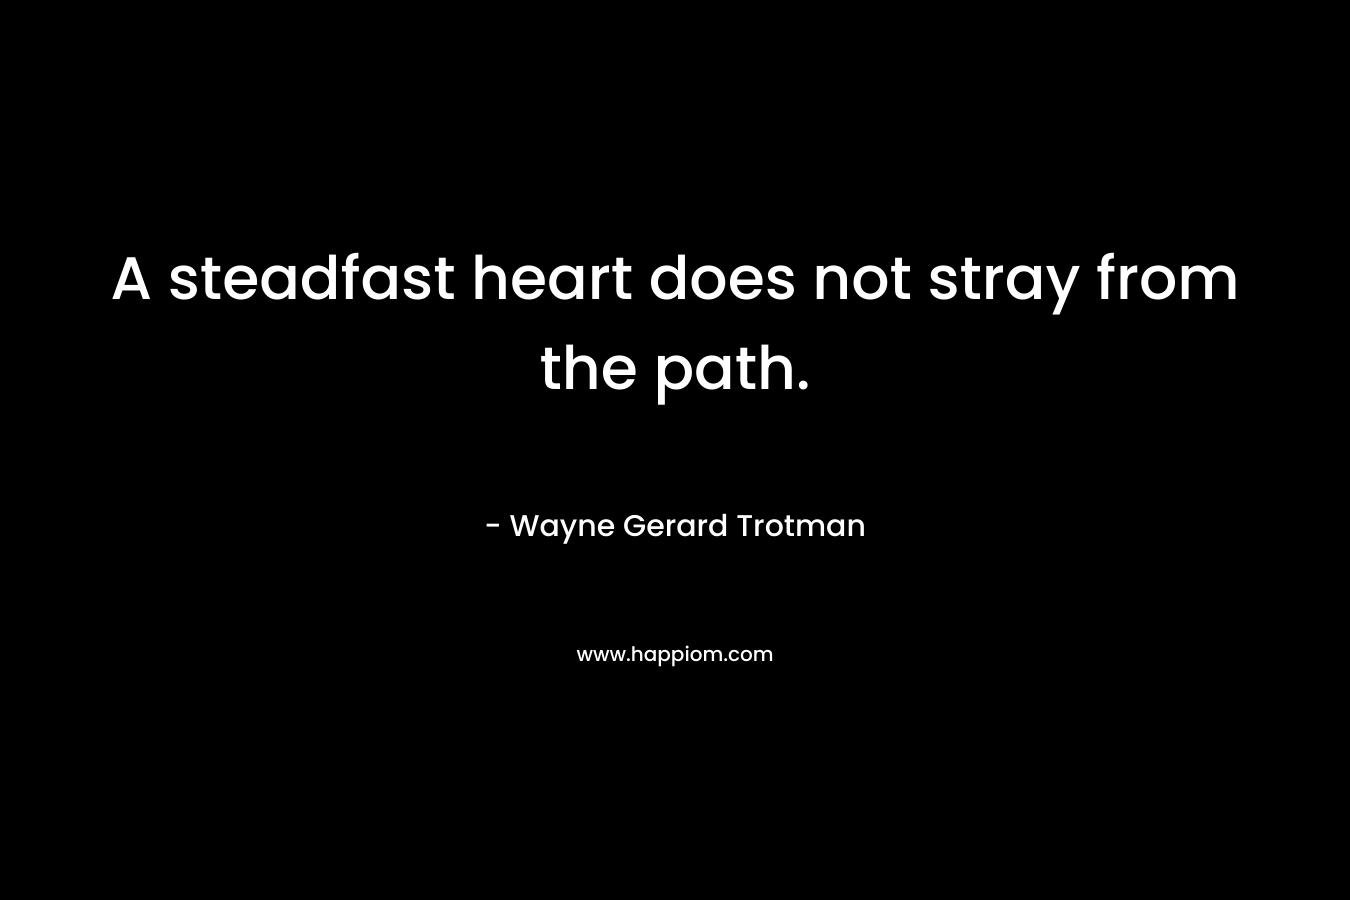 A steadfast heart does not stray from the path. – Wayne Gerard Trotman